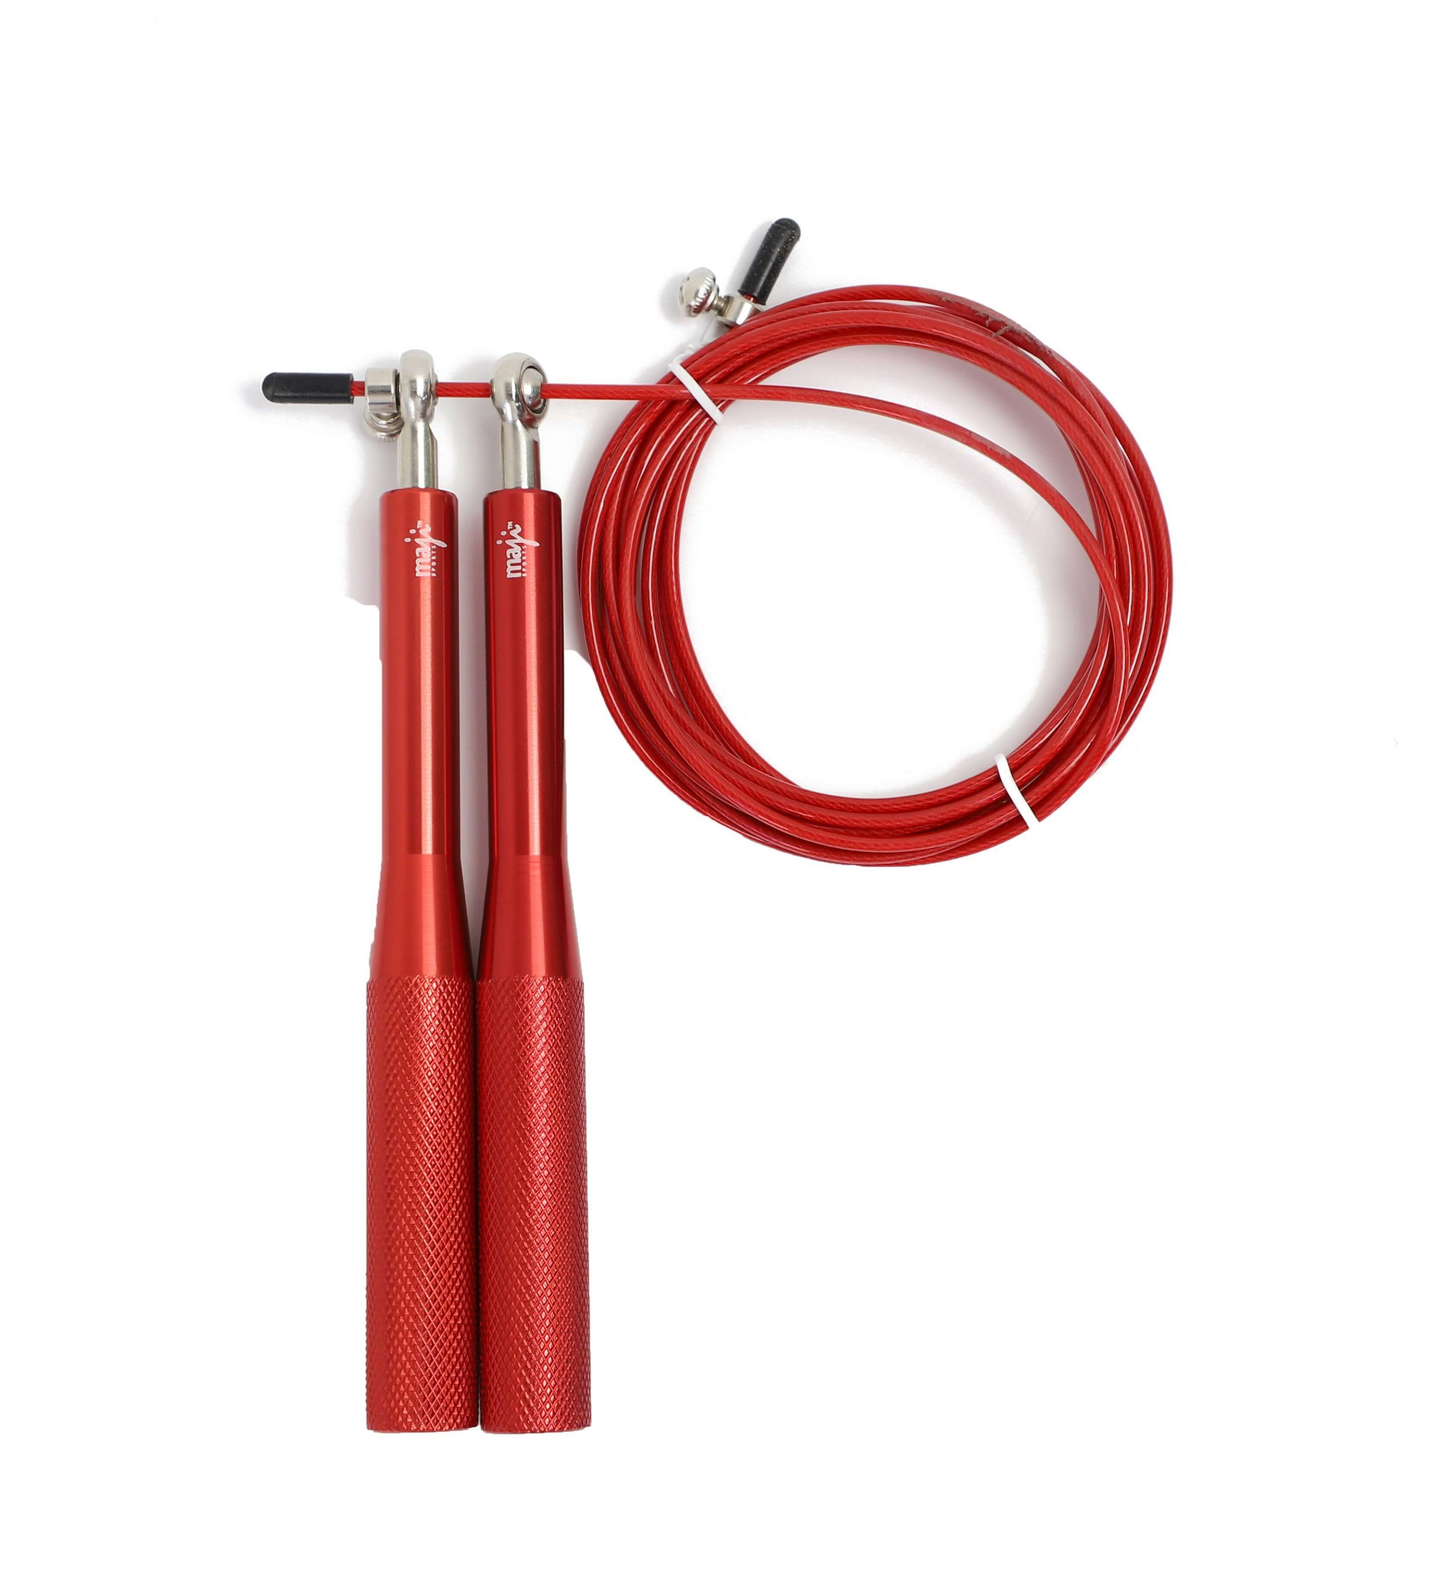 Maji Sports High Speed Jump Rope with Aluminum Handles - Lightweight and Durable Cardio Companion